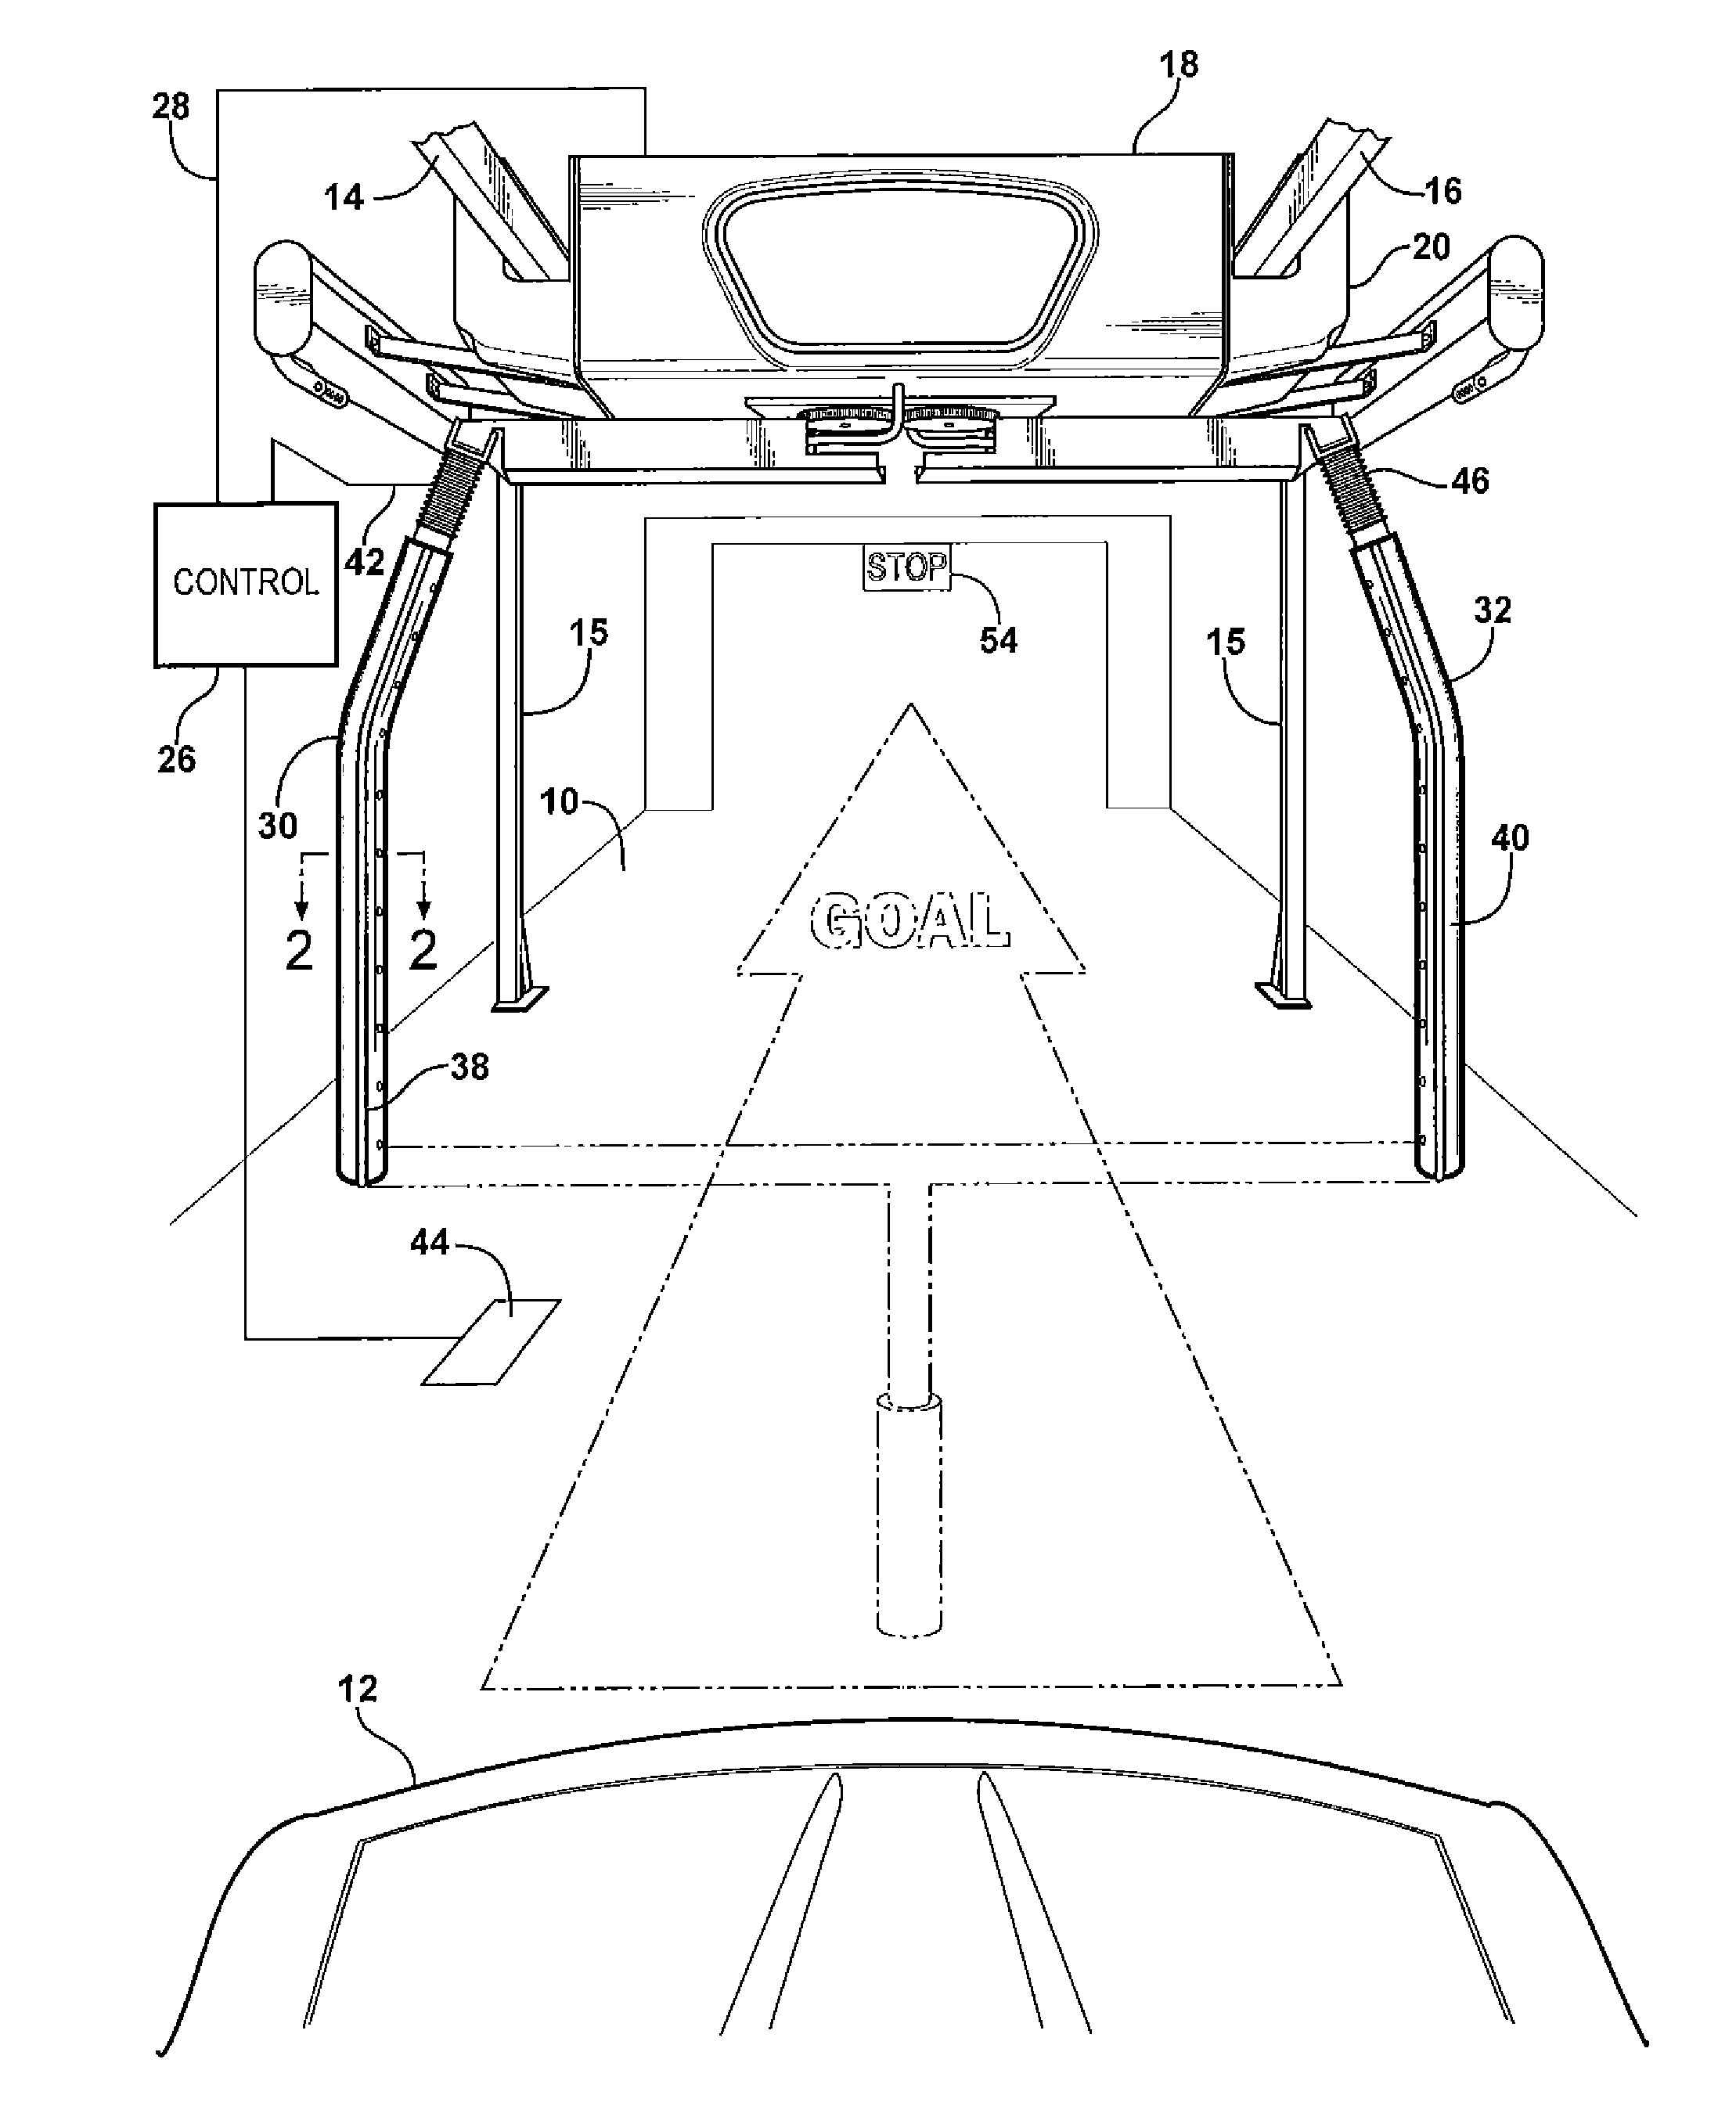 Vehicle spray washer with lighting for position assistance